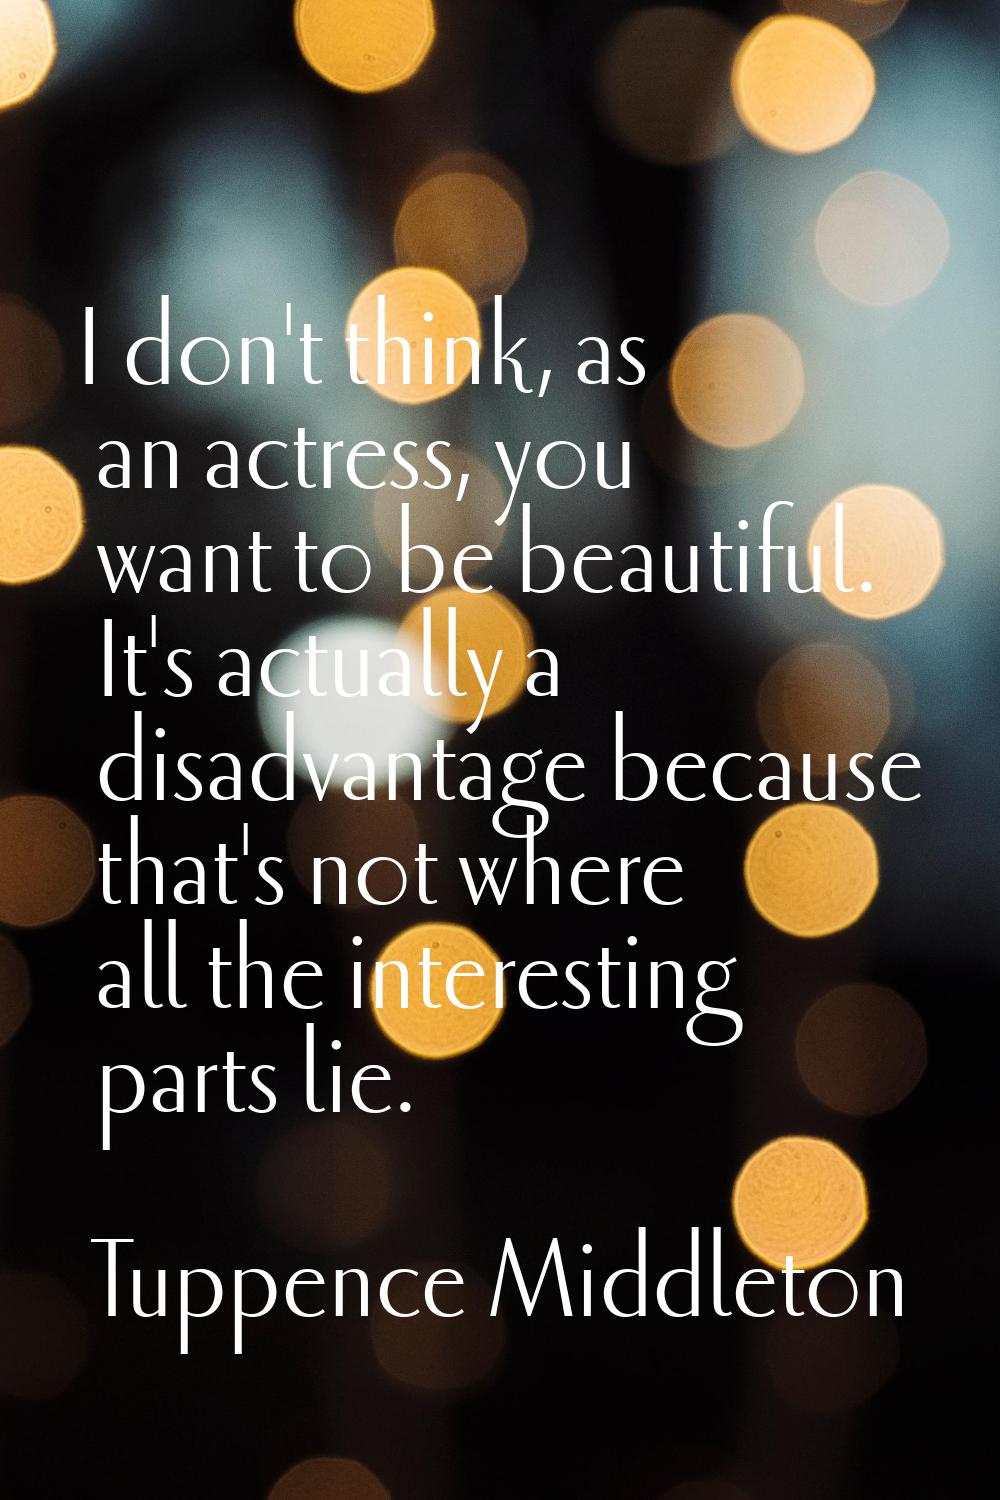 I don't think, as an actress, you want to be beautiful. It's actually a disadvantage because that's